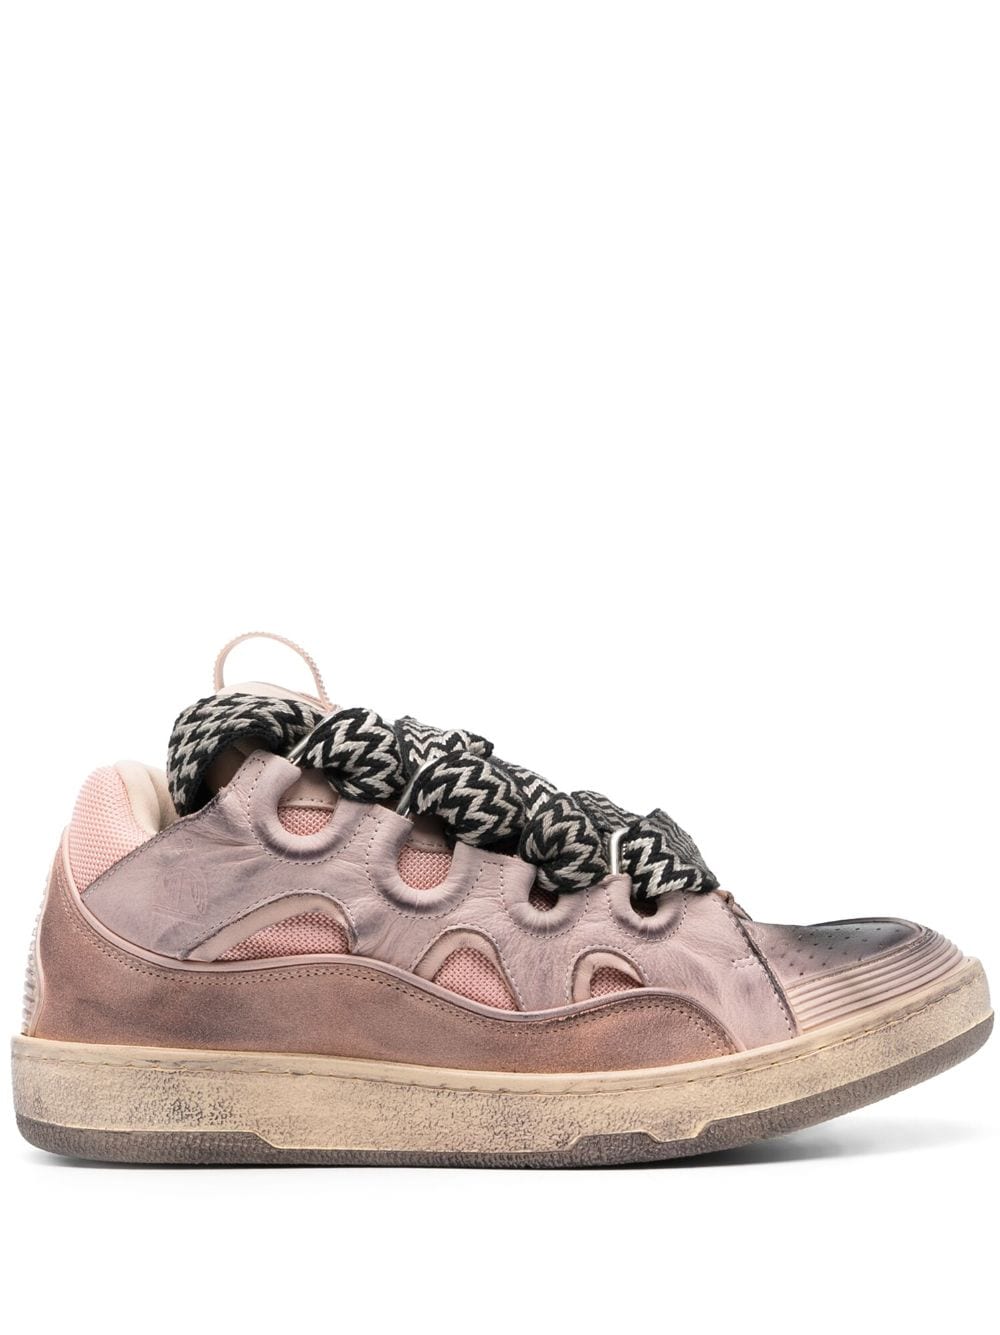 Lanvin Curb Chunky Leather Sneakers In Pink